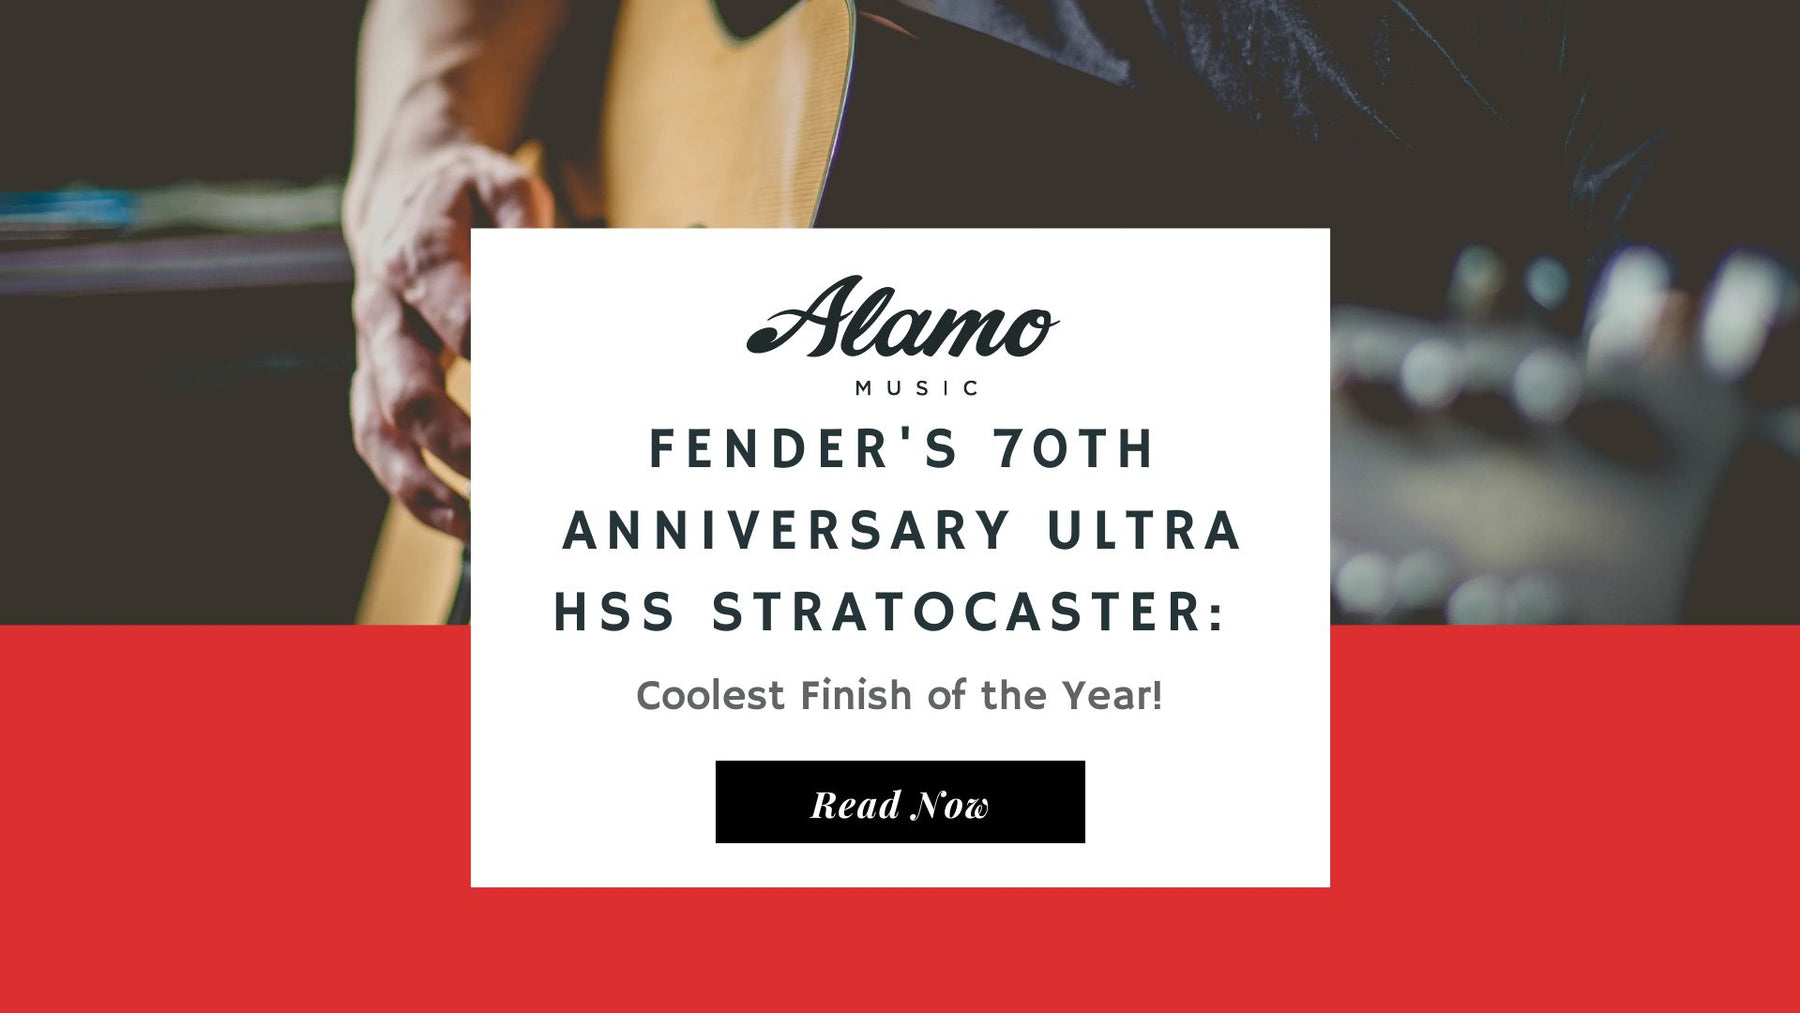 Fender's 70th Anniversary Ultra HSS Stratocaster: The Coolest Finish of the Year!